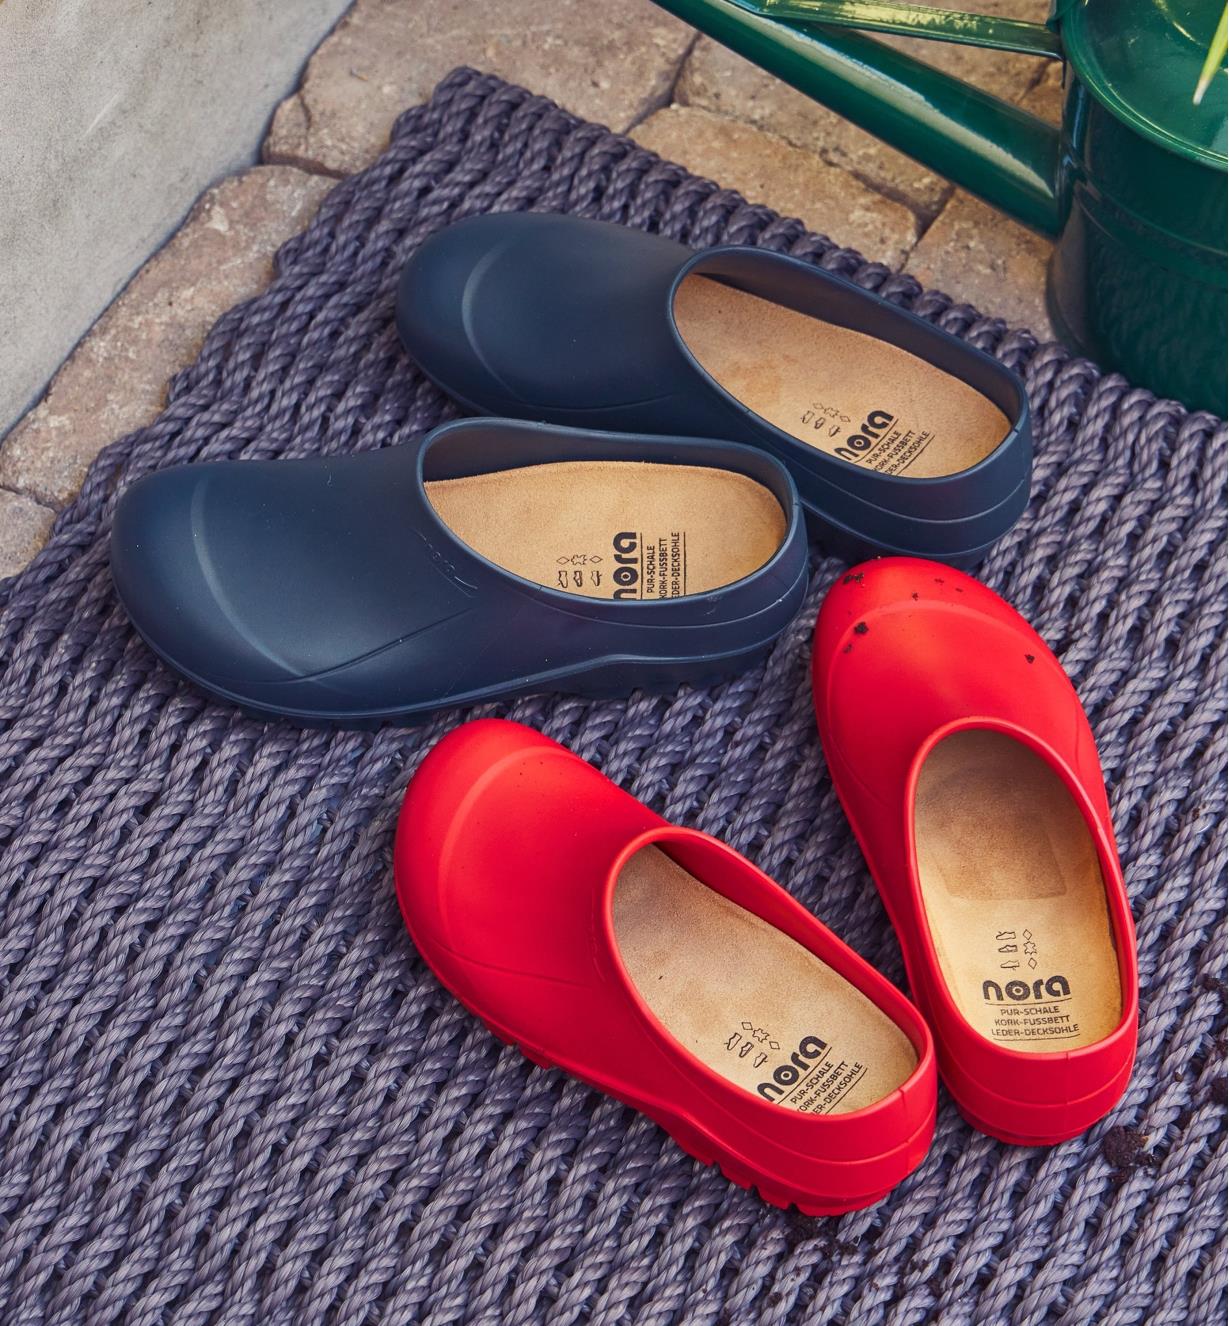 Two pairs of European garden clogs, one red and one navy, placed on a doormat on a patio